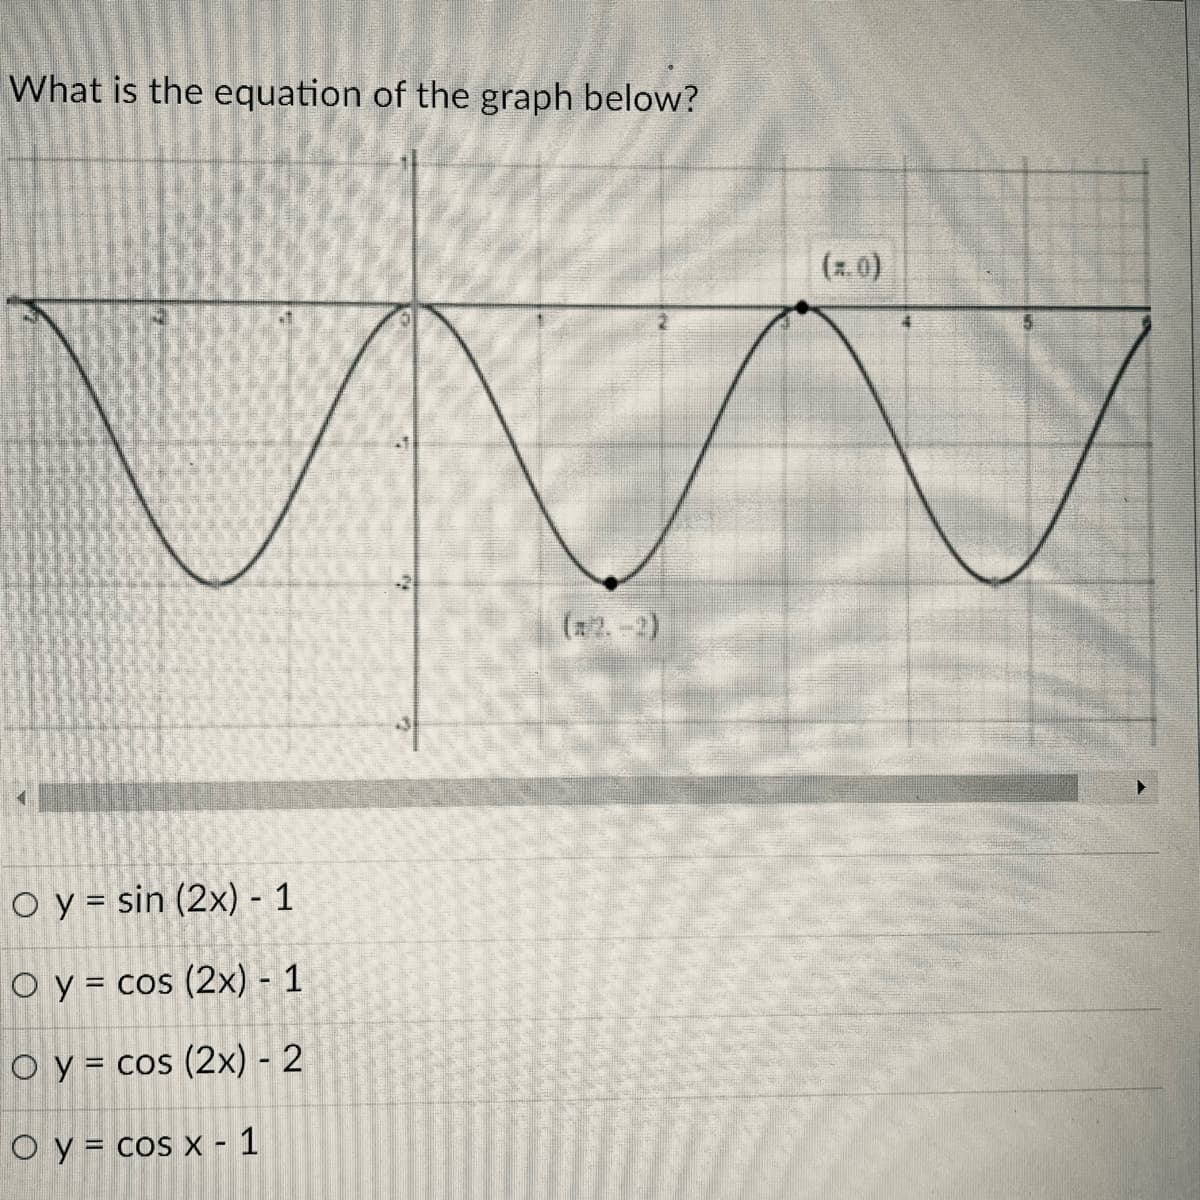 What is the equation of the graph below?
(z.0)
(12.-2)
O y = sin (2x) - 1
O y = cos (2x) - 1
O y = cos (2x) - 2
O y = cos X - 1
